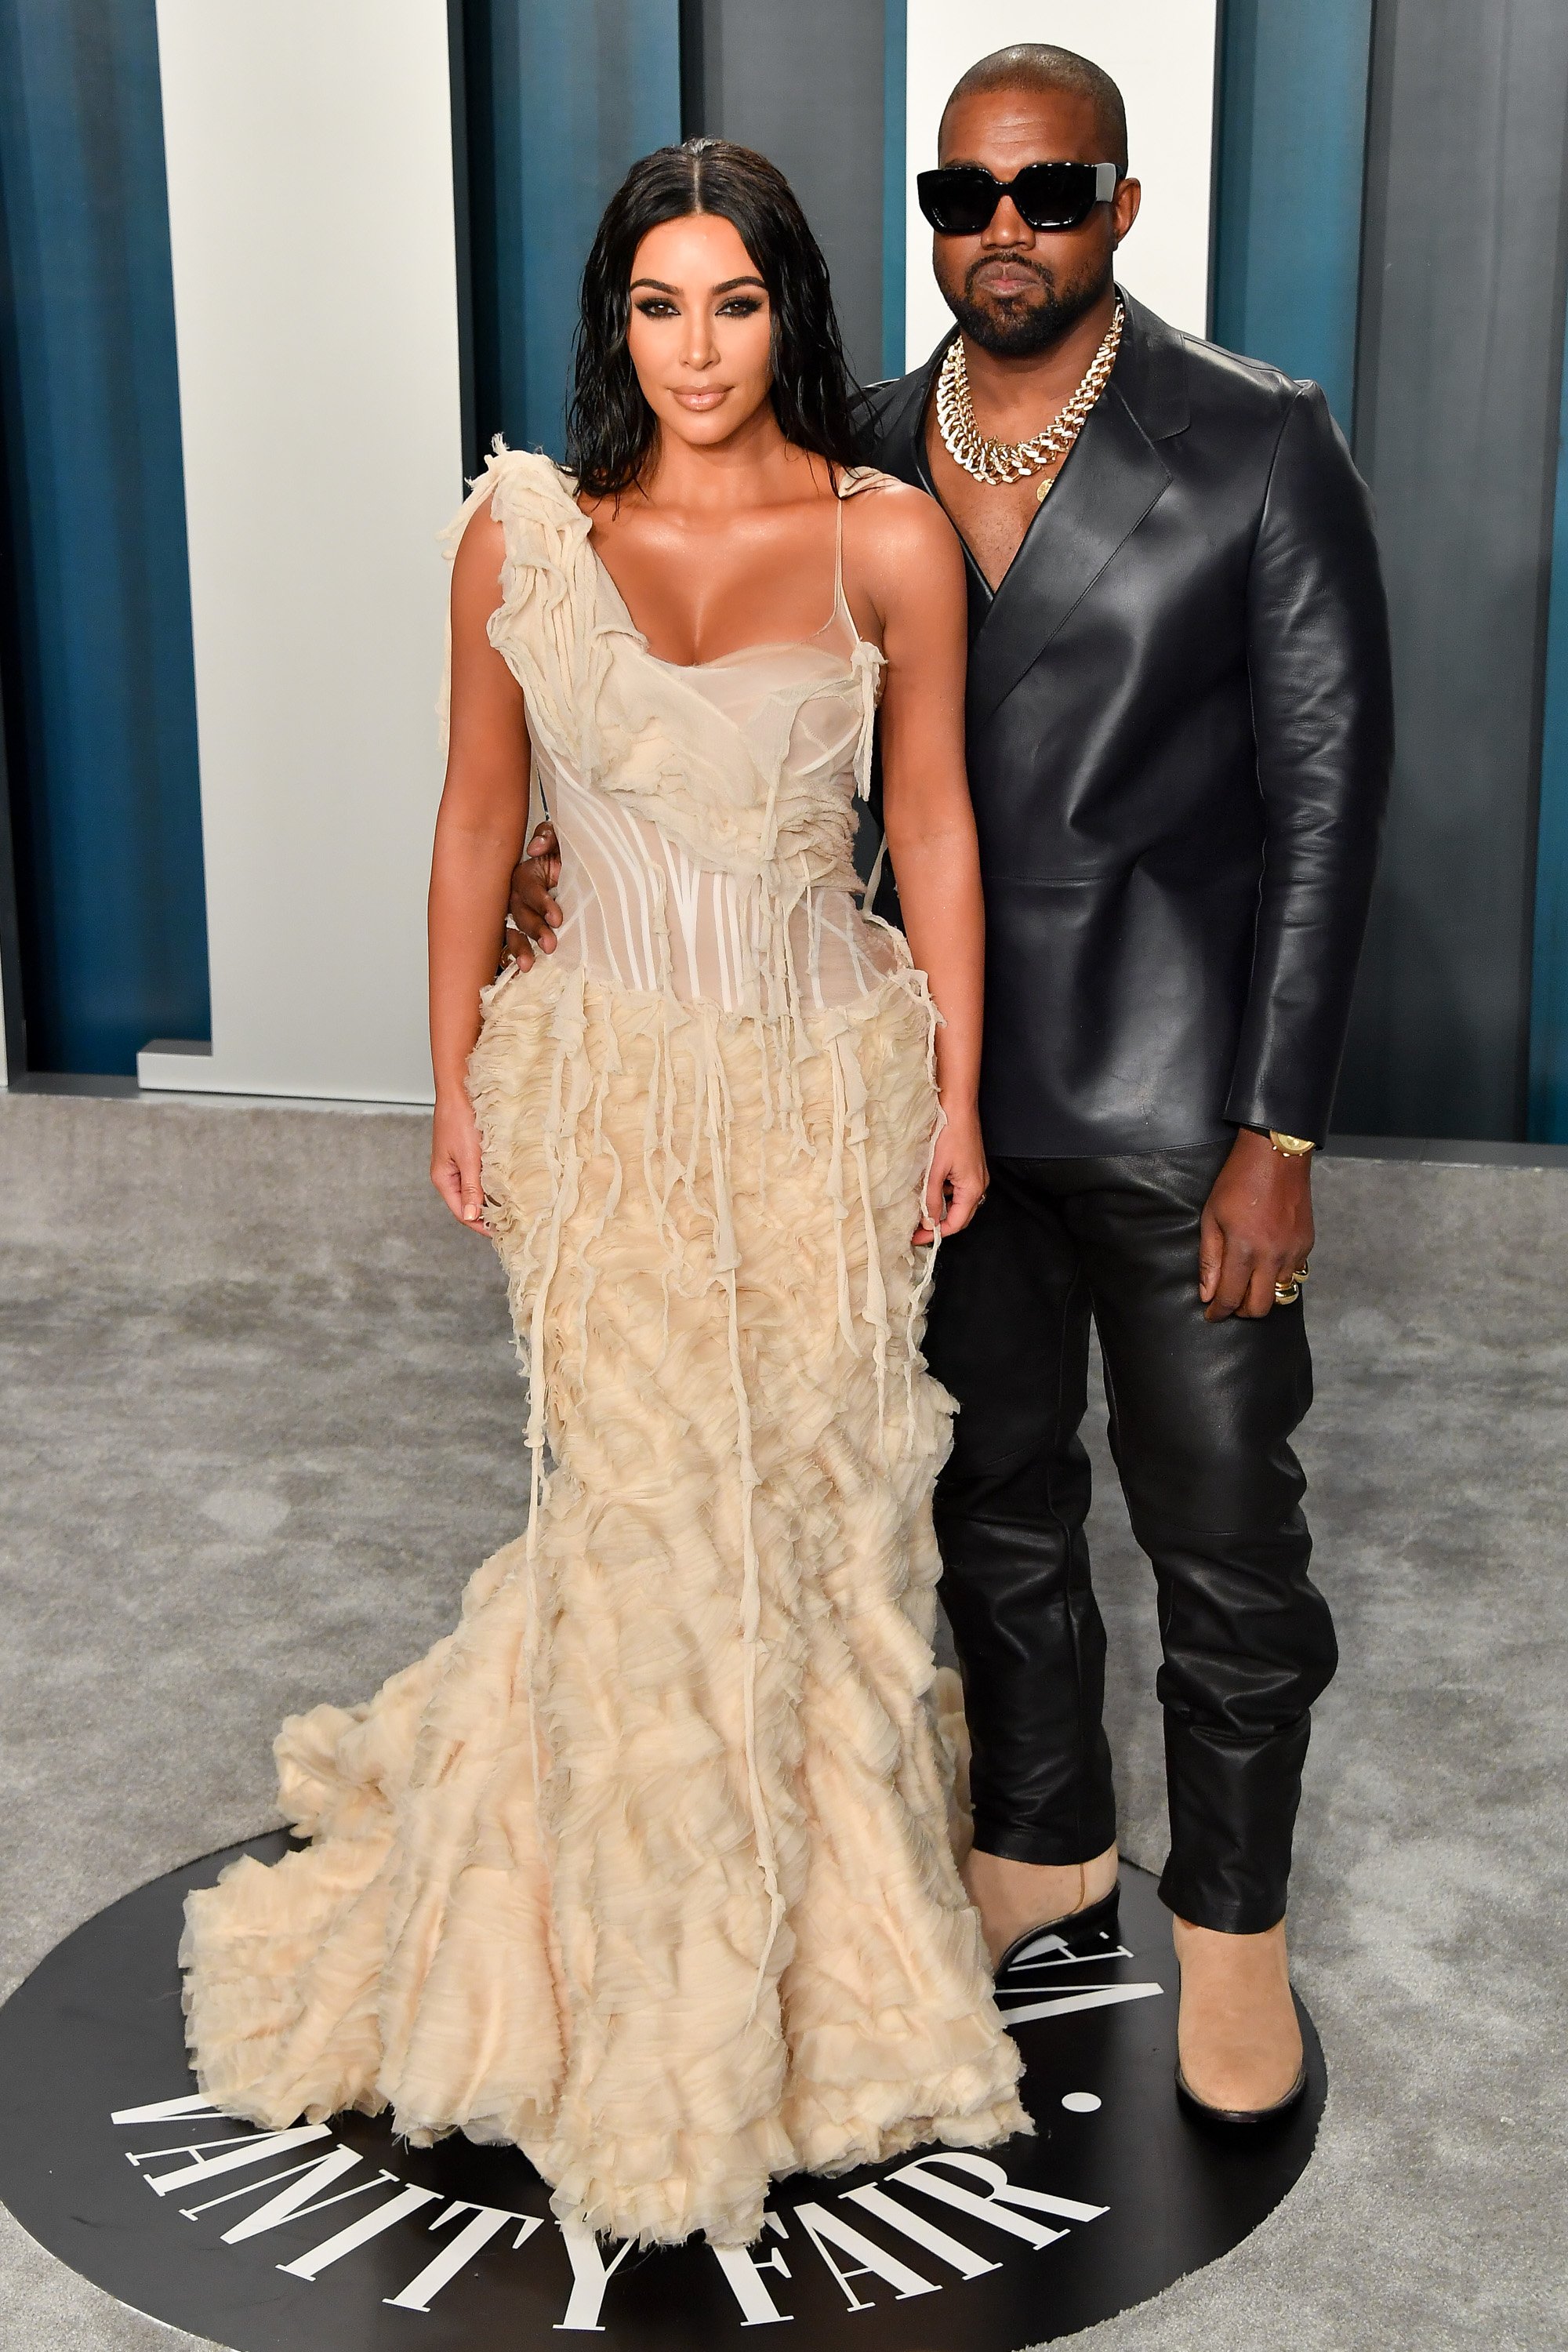 Kim Kardashian and Kanye West arrive at the 2020 Vanity Fair Oscar Party at Wallis Annenberg Center for the Performing Arts on February 09, 2020 in Beverly Hills, California | Photo: Getty Images